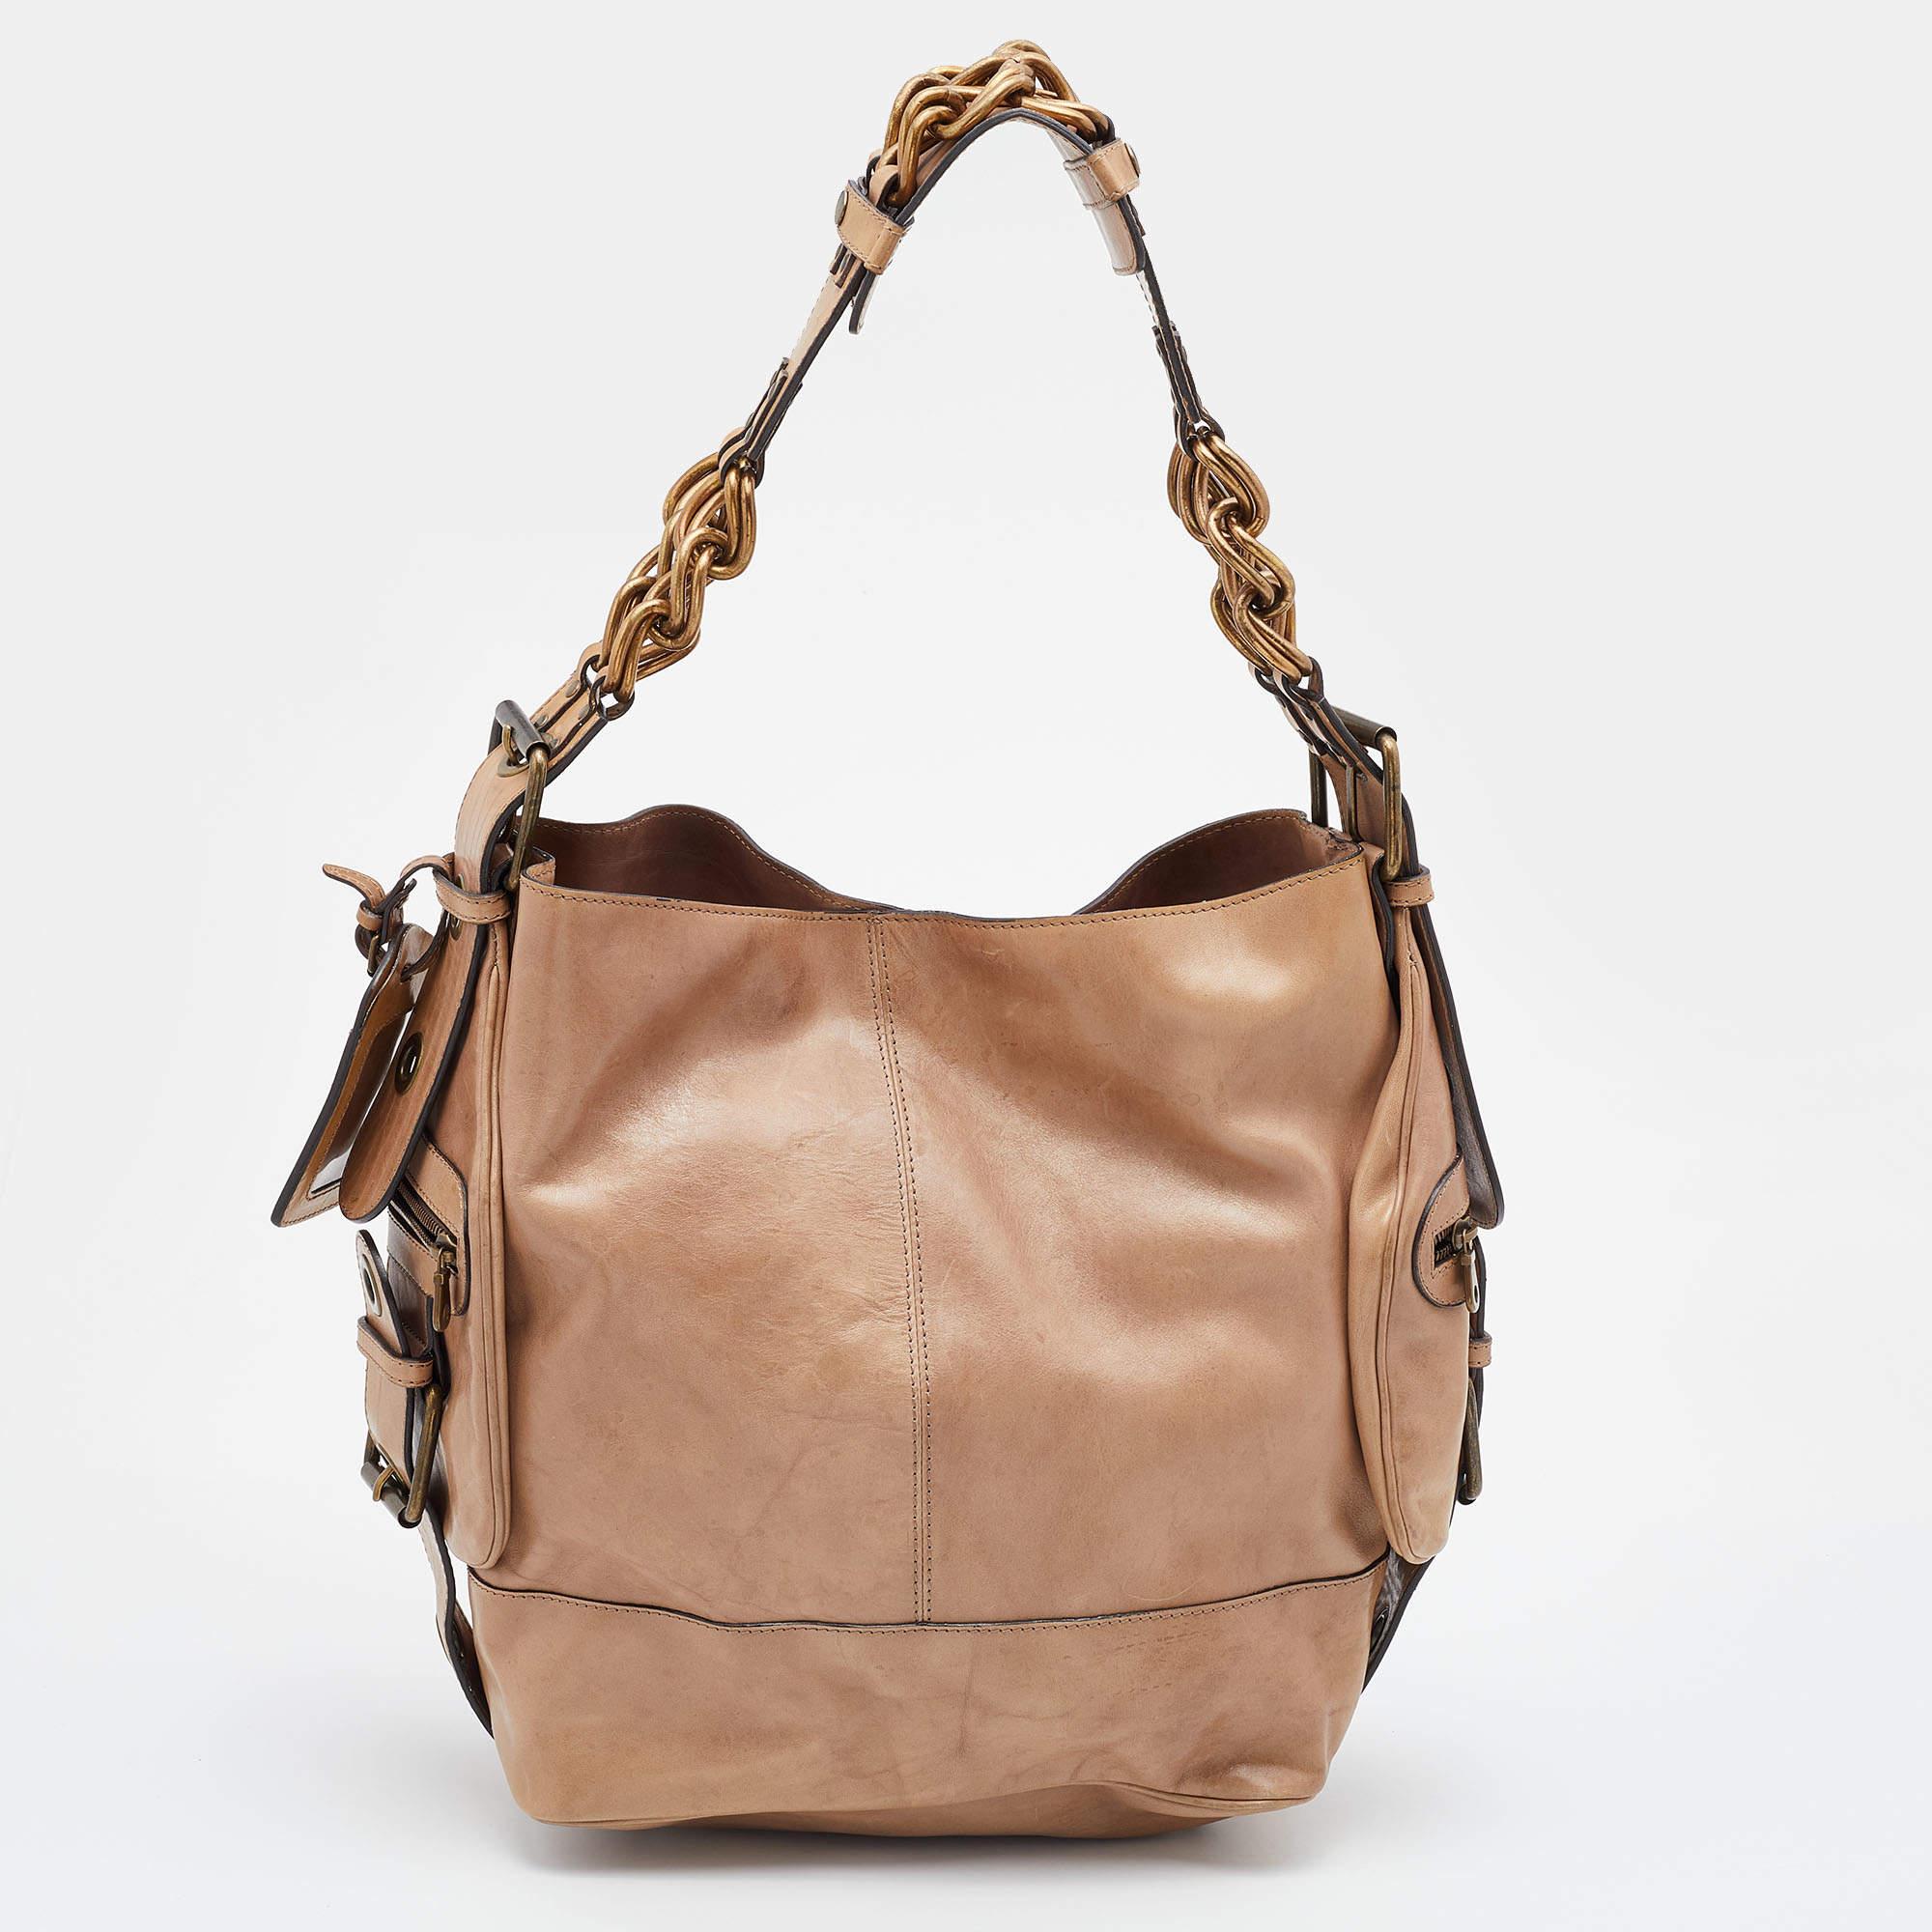 Stylish handbags never fail to make a fashionable impression. Make this designer hobo yours by pairing it with your sophisticated workwear as well as chic casual looks.

Includes: Info Card, Brand Tag
